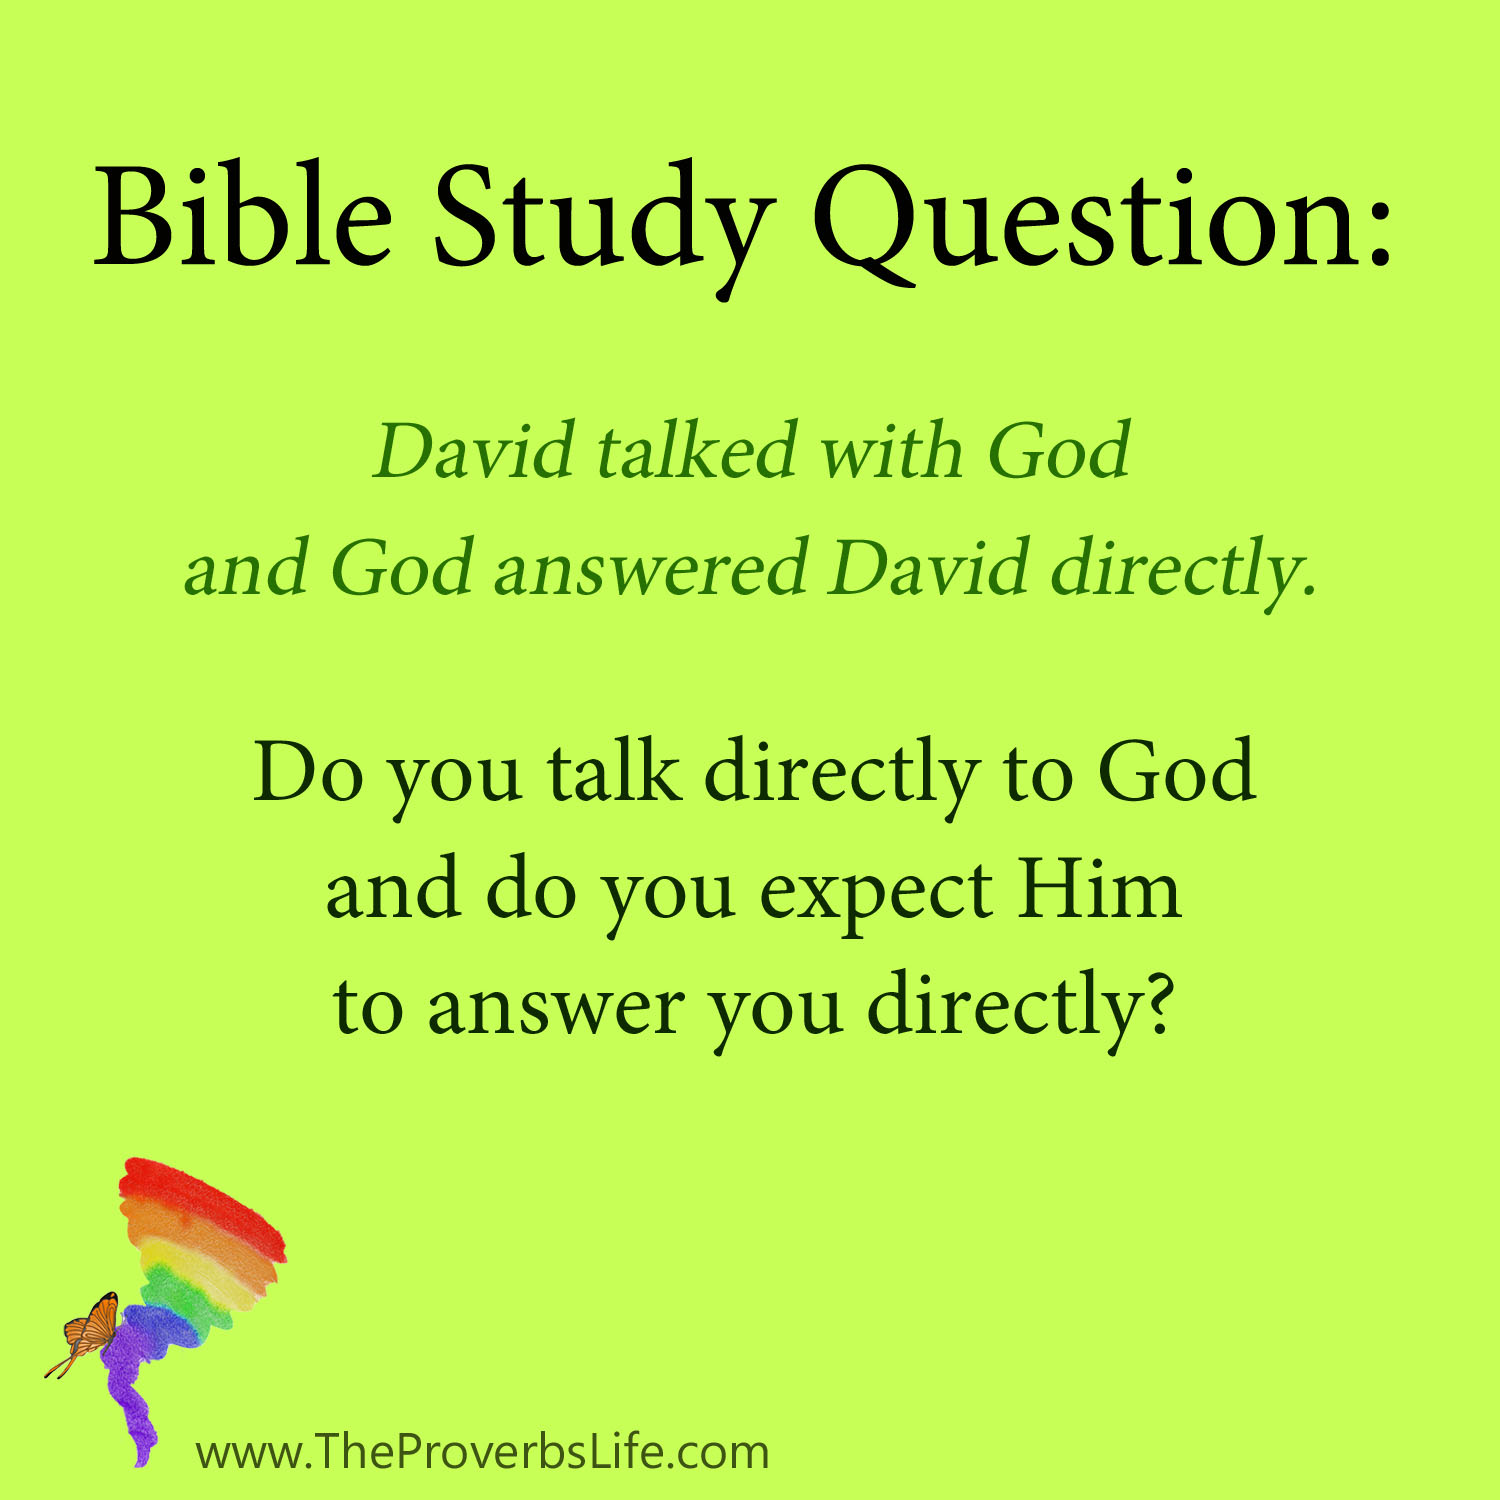 Bible Study Question - expect to hear from God